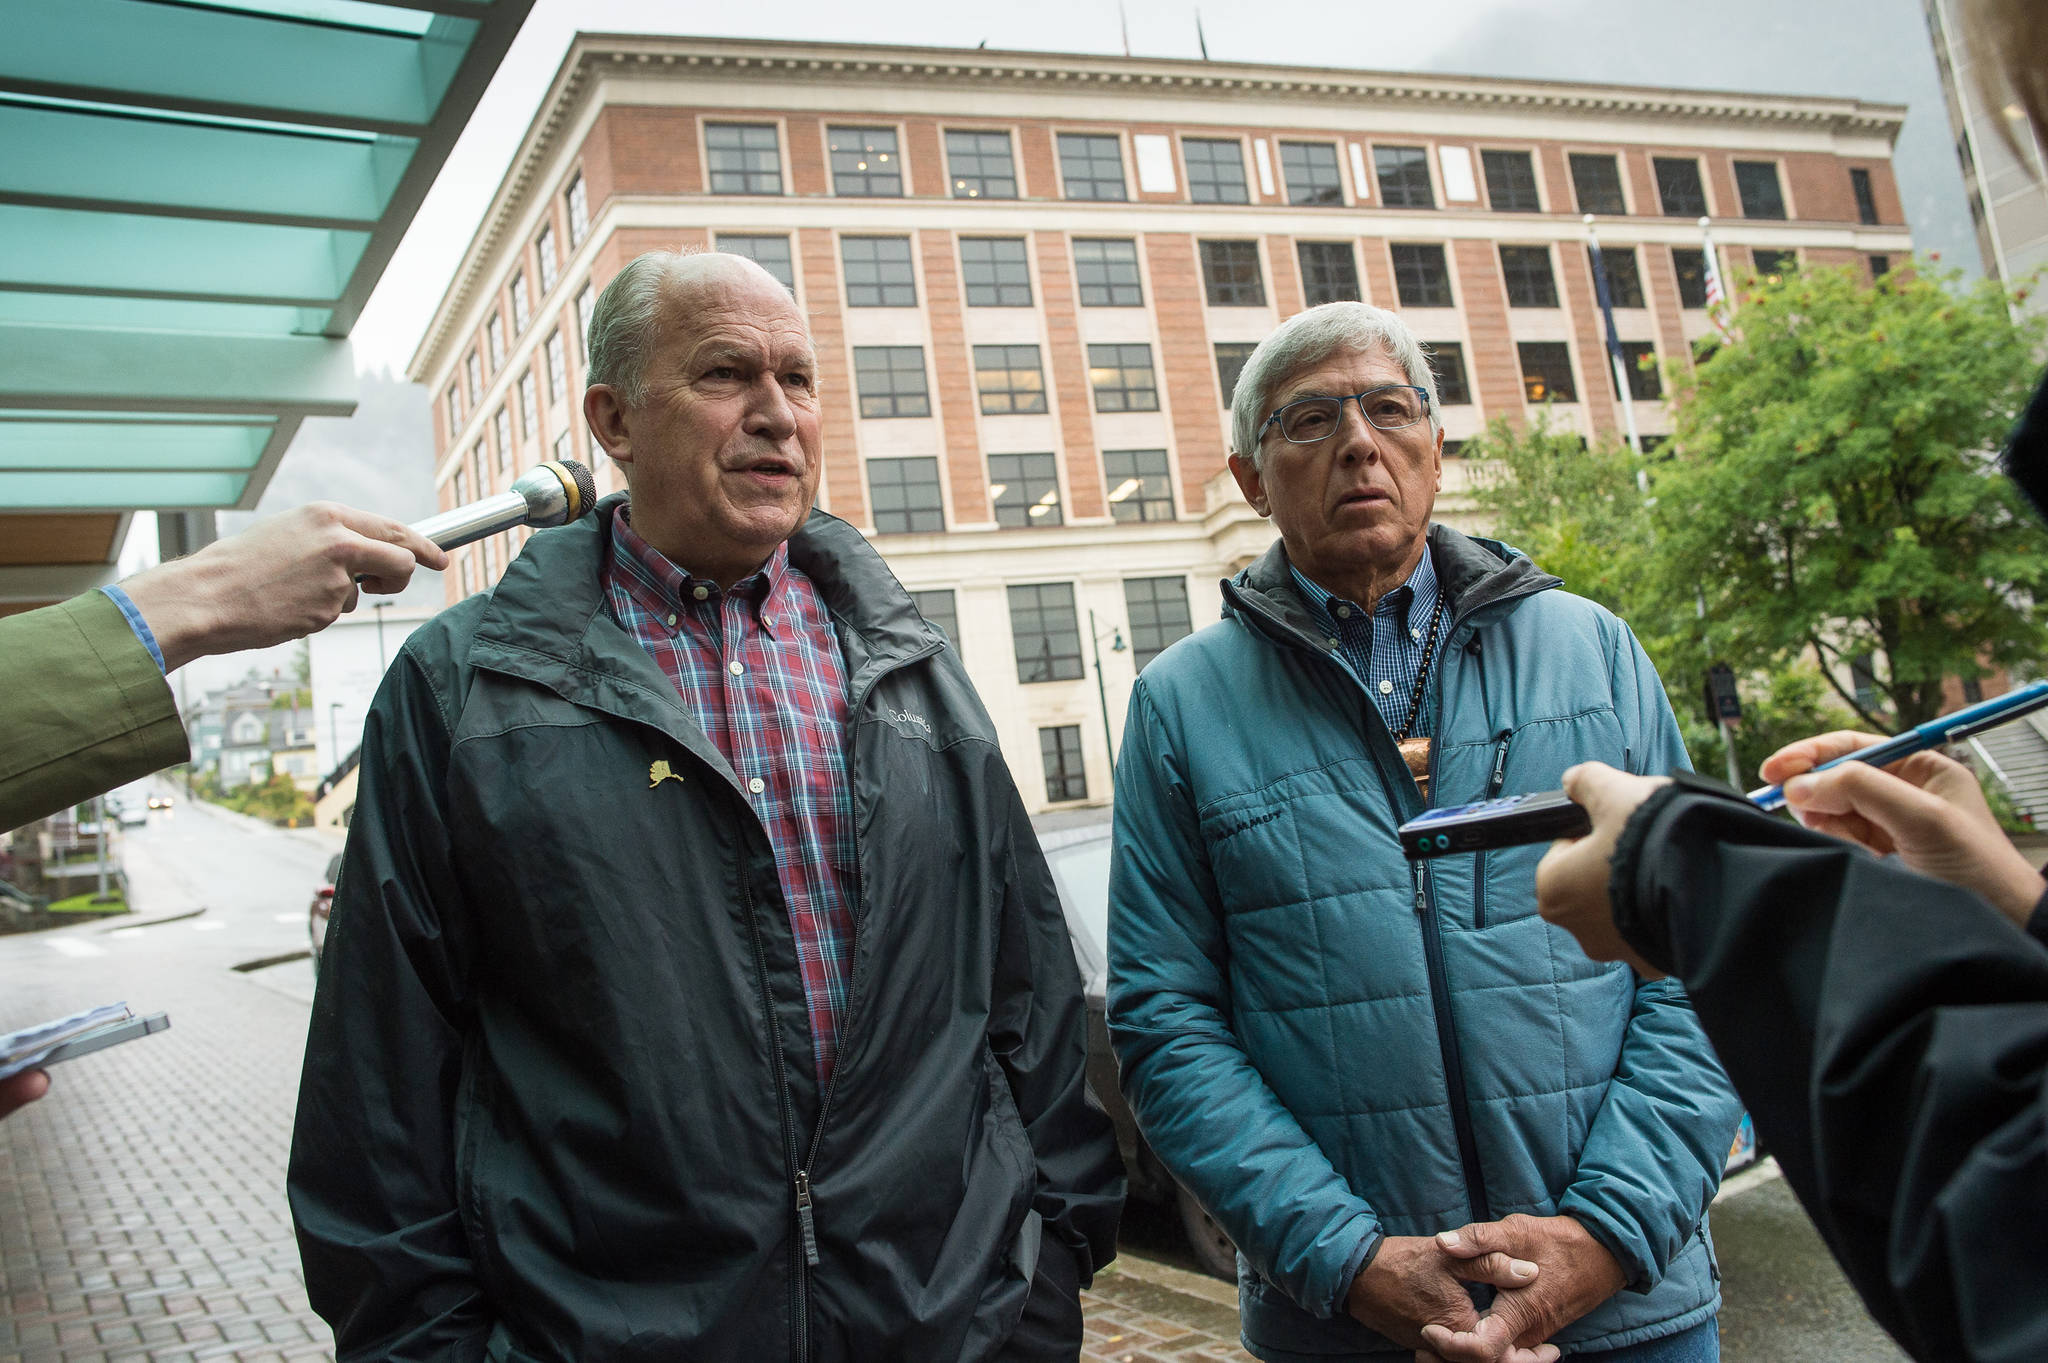 Gov. Bill Walker and Lt. Gov. Byron Mallott speak to the press after filing for re-election at the state’s election office in Juneau on Monday, Aug. 21, 2017.